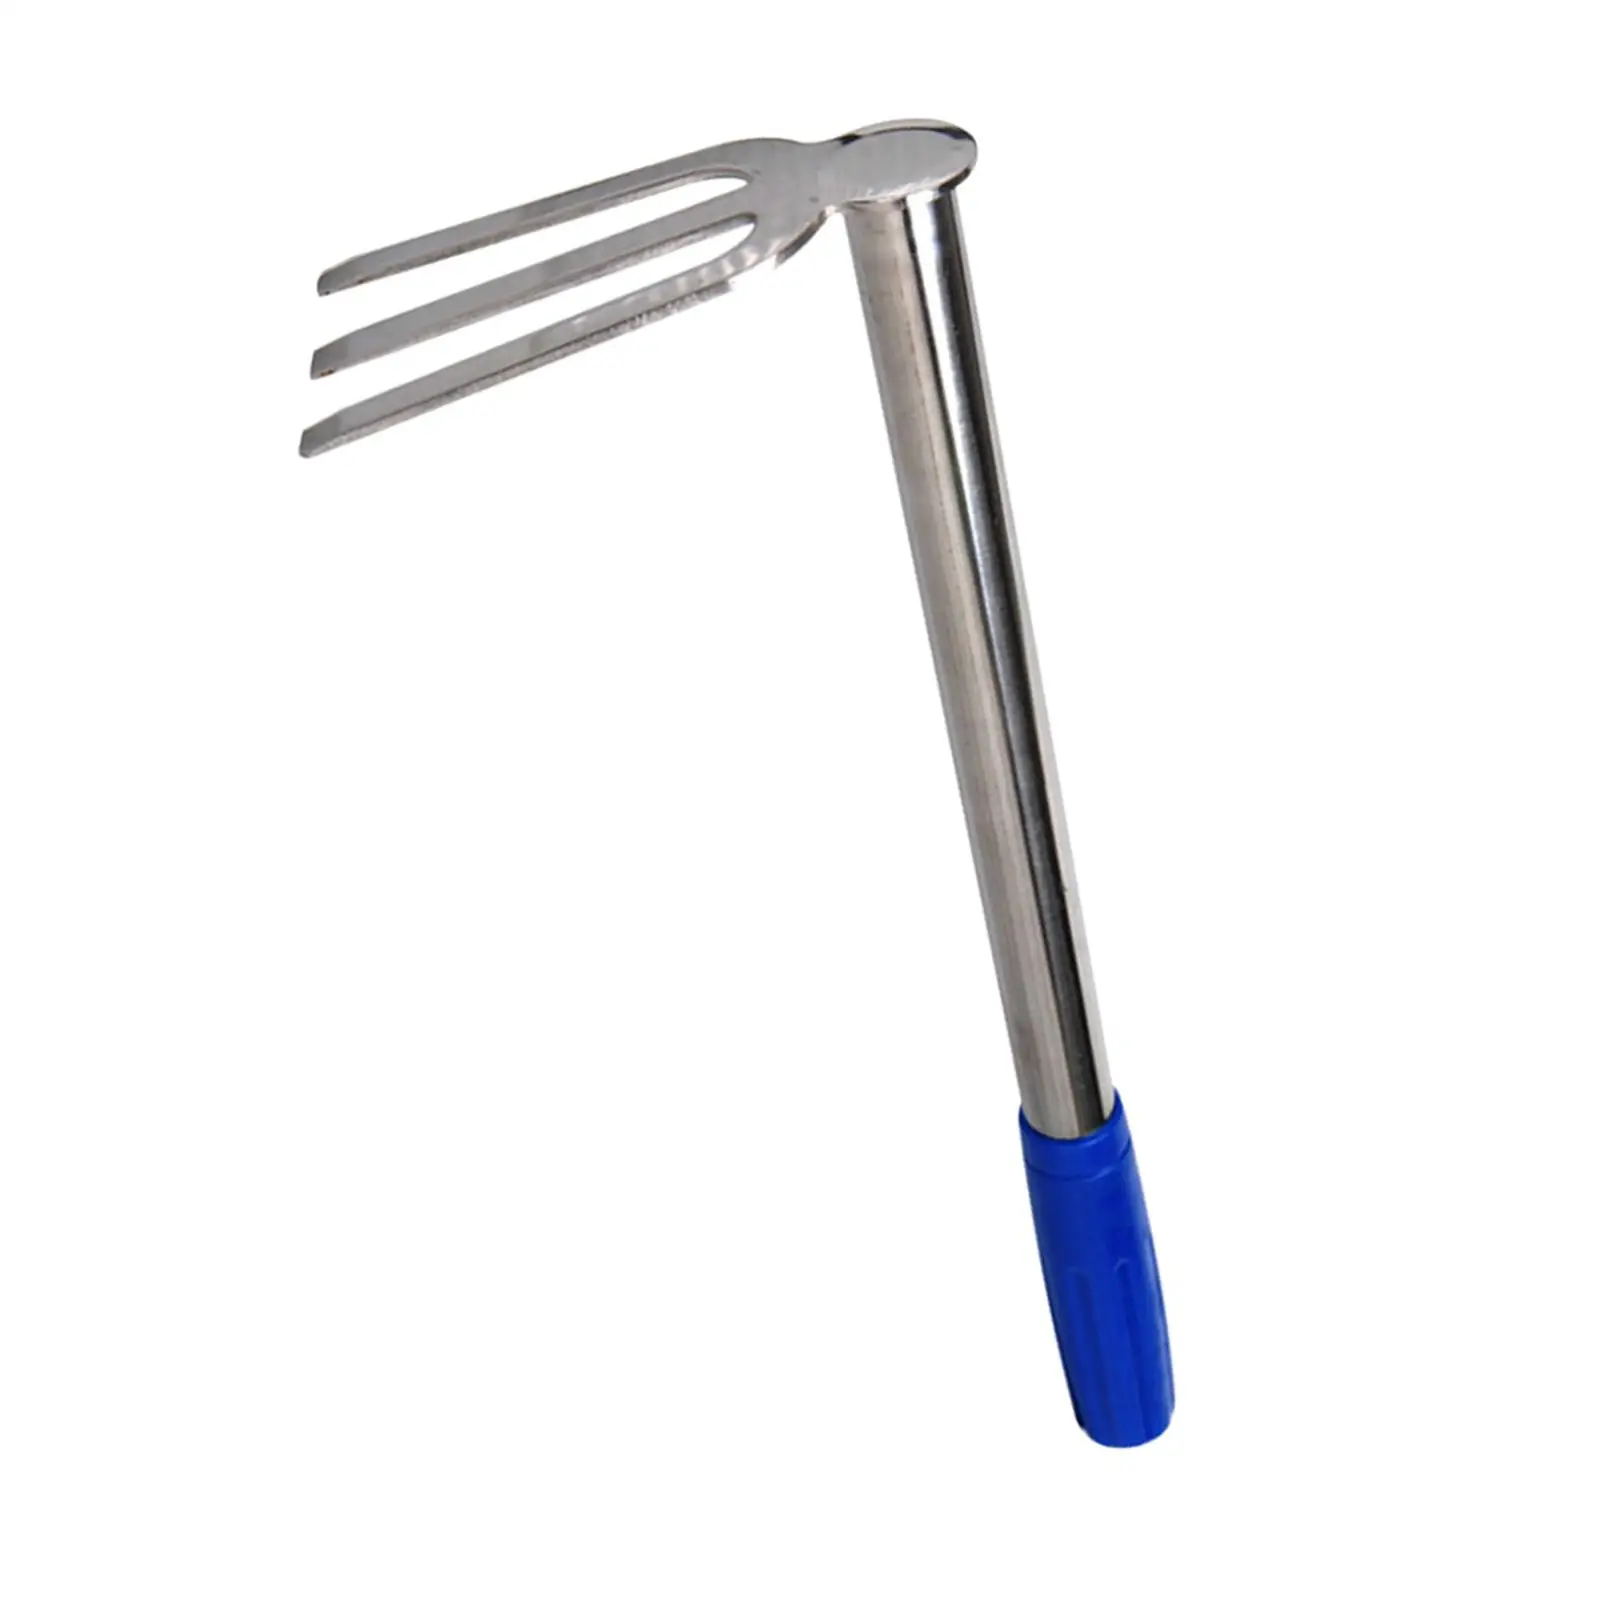 Stainless Steel Gardening Hoe Weeding Removal Tool with Handle Gardening